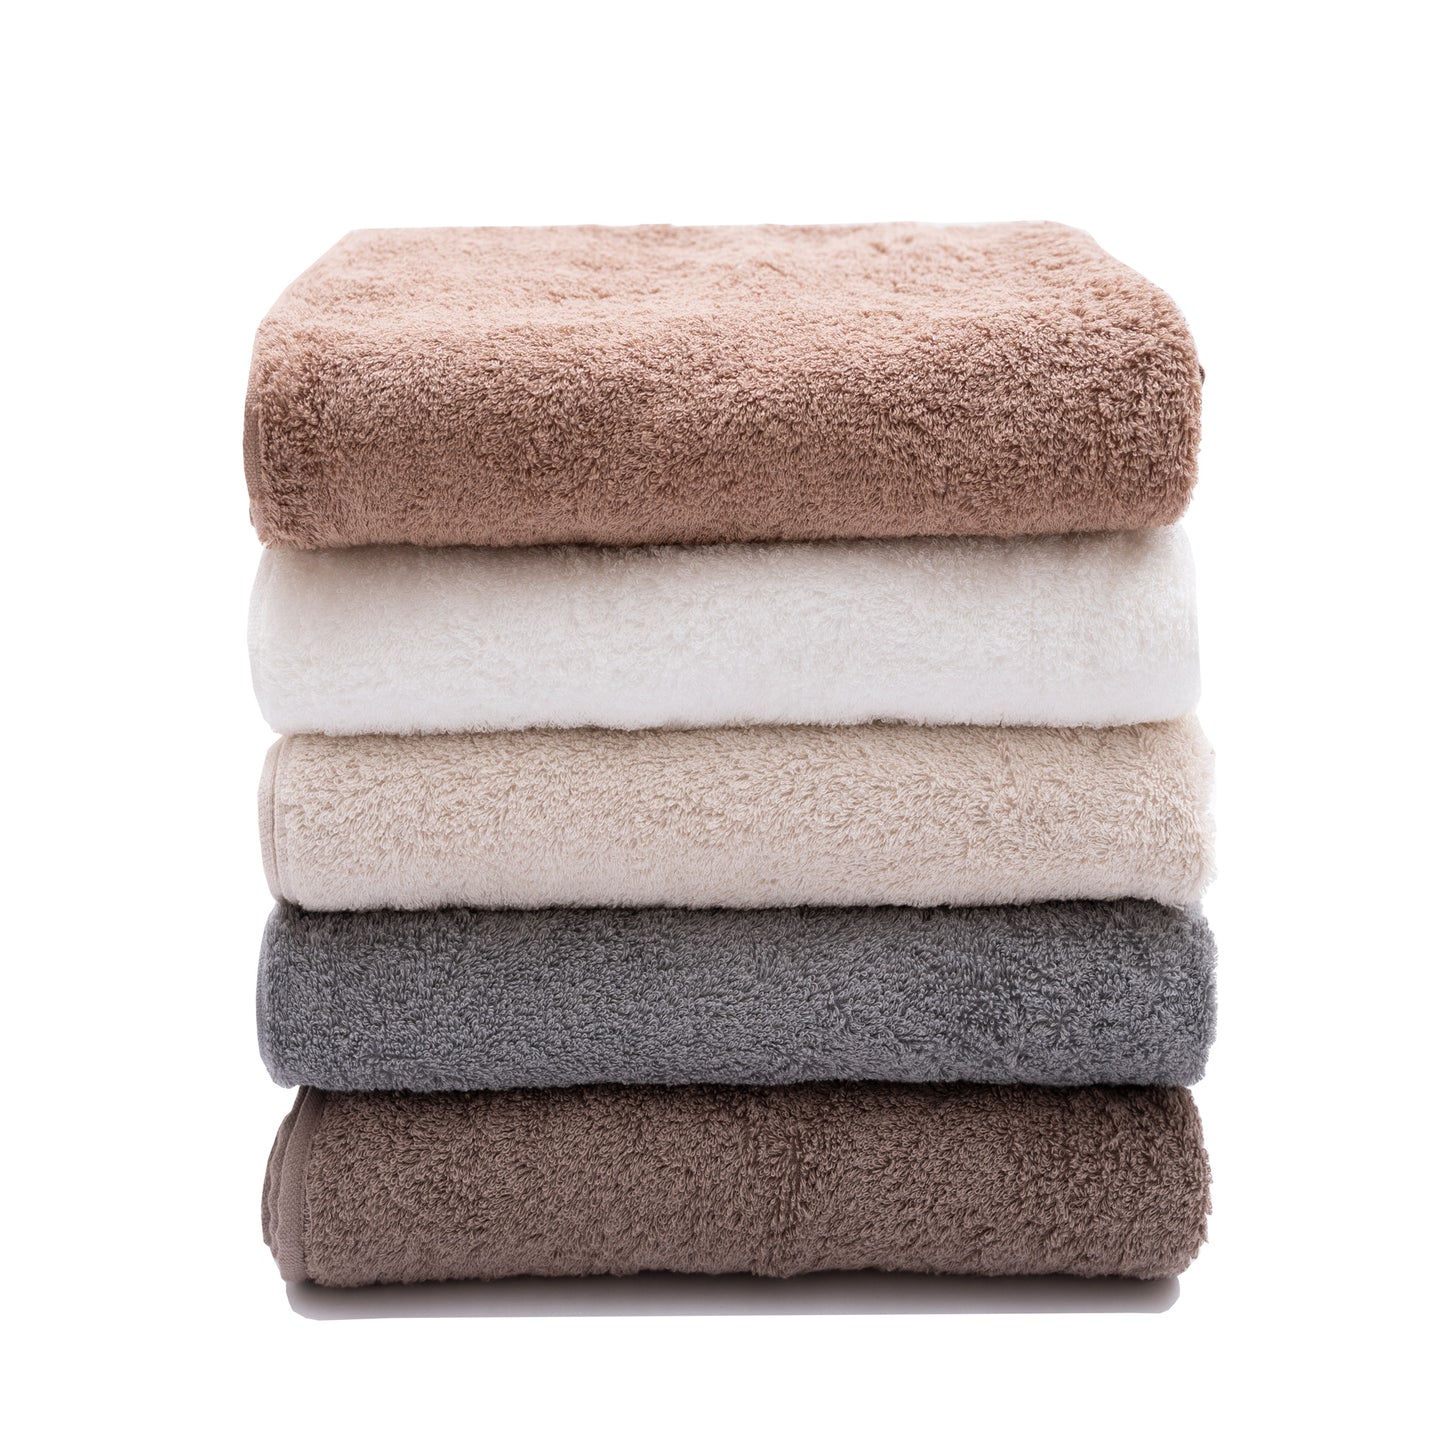 5 colors of "factory" towel